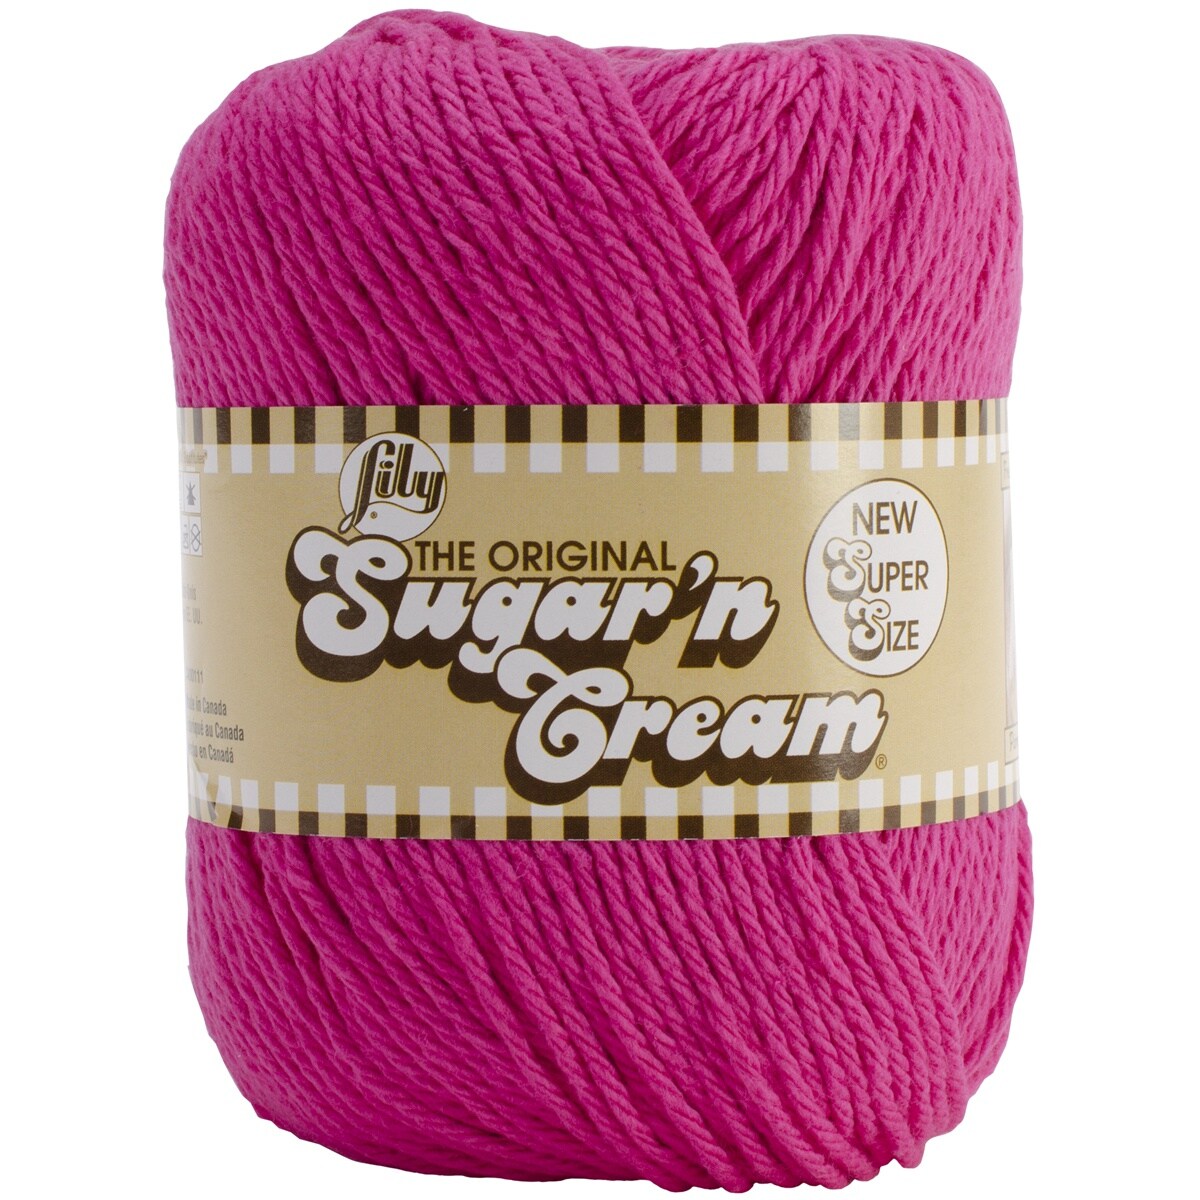 3x60g Pink Yarn for Crocheting and Knitting;3x66m (72yds) Cotton Yarn for  Beginners with Easy-to-See Stitches;Worsted-Weight Medium #4;Cotton-Nylon